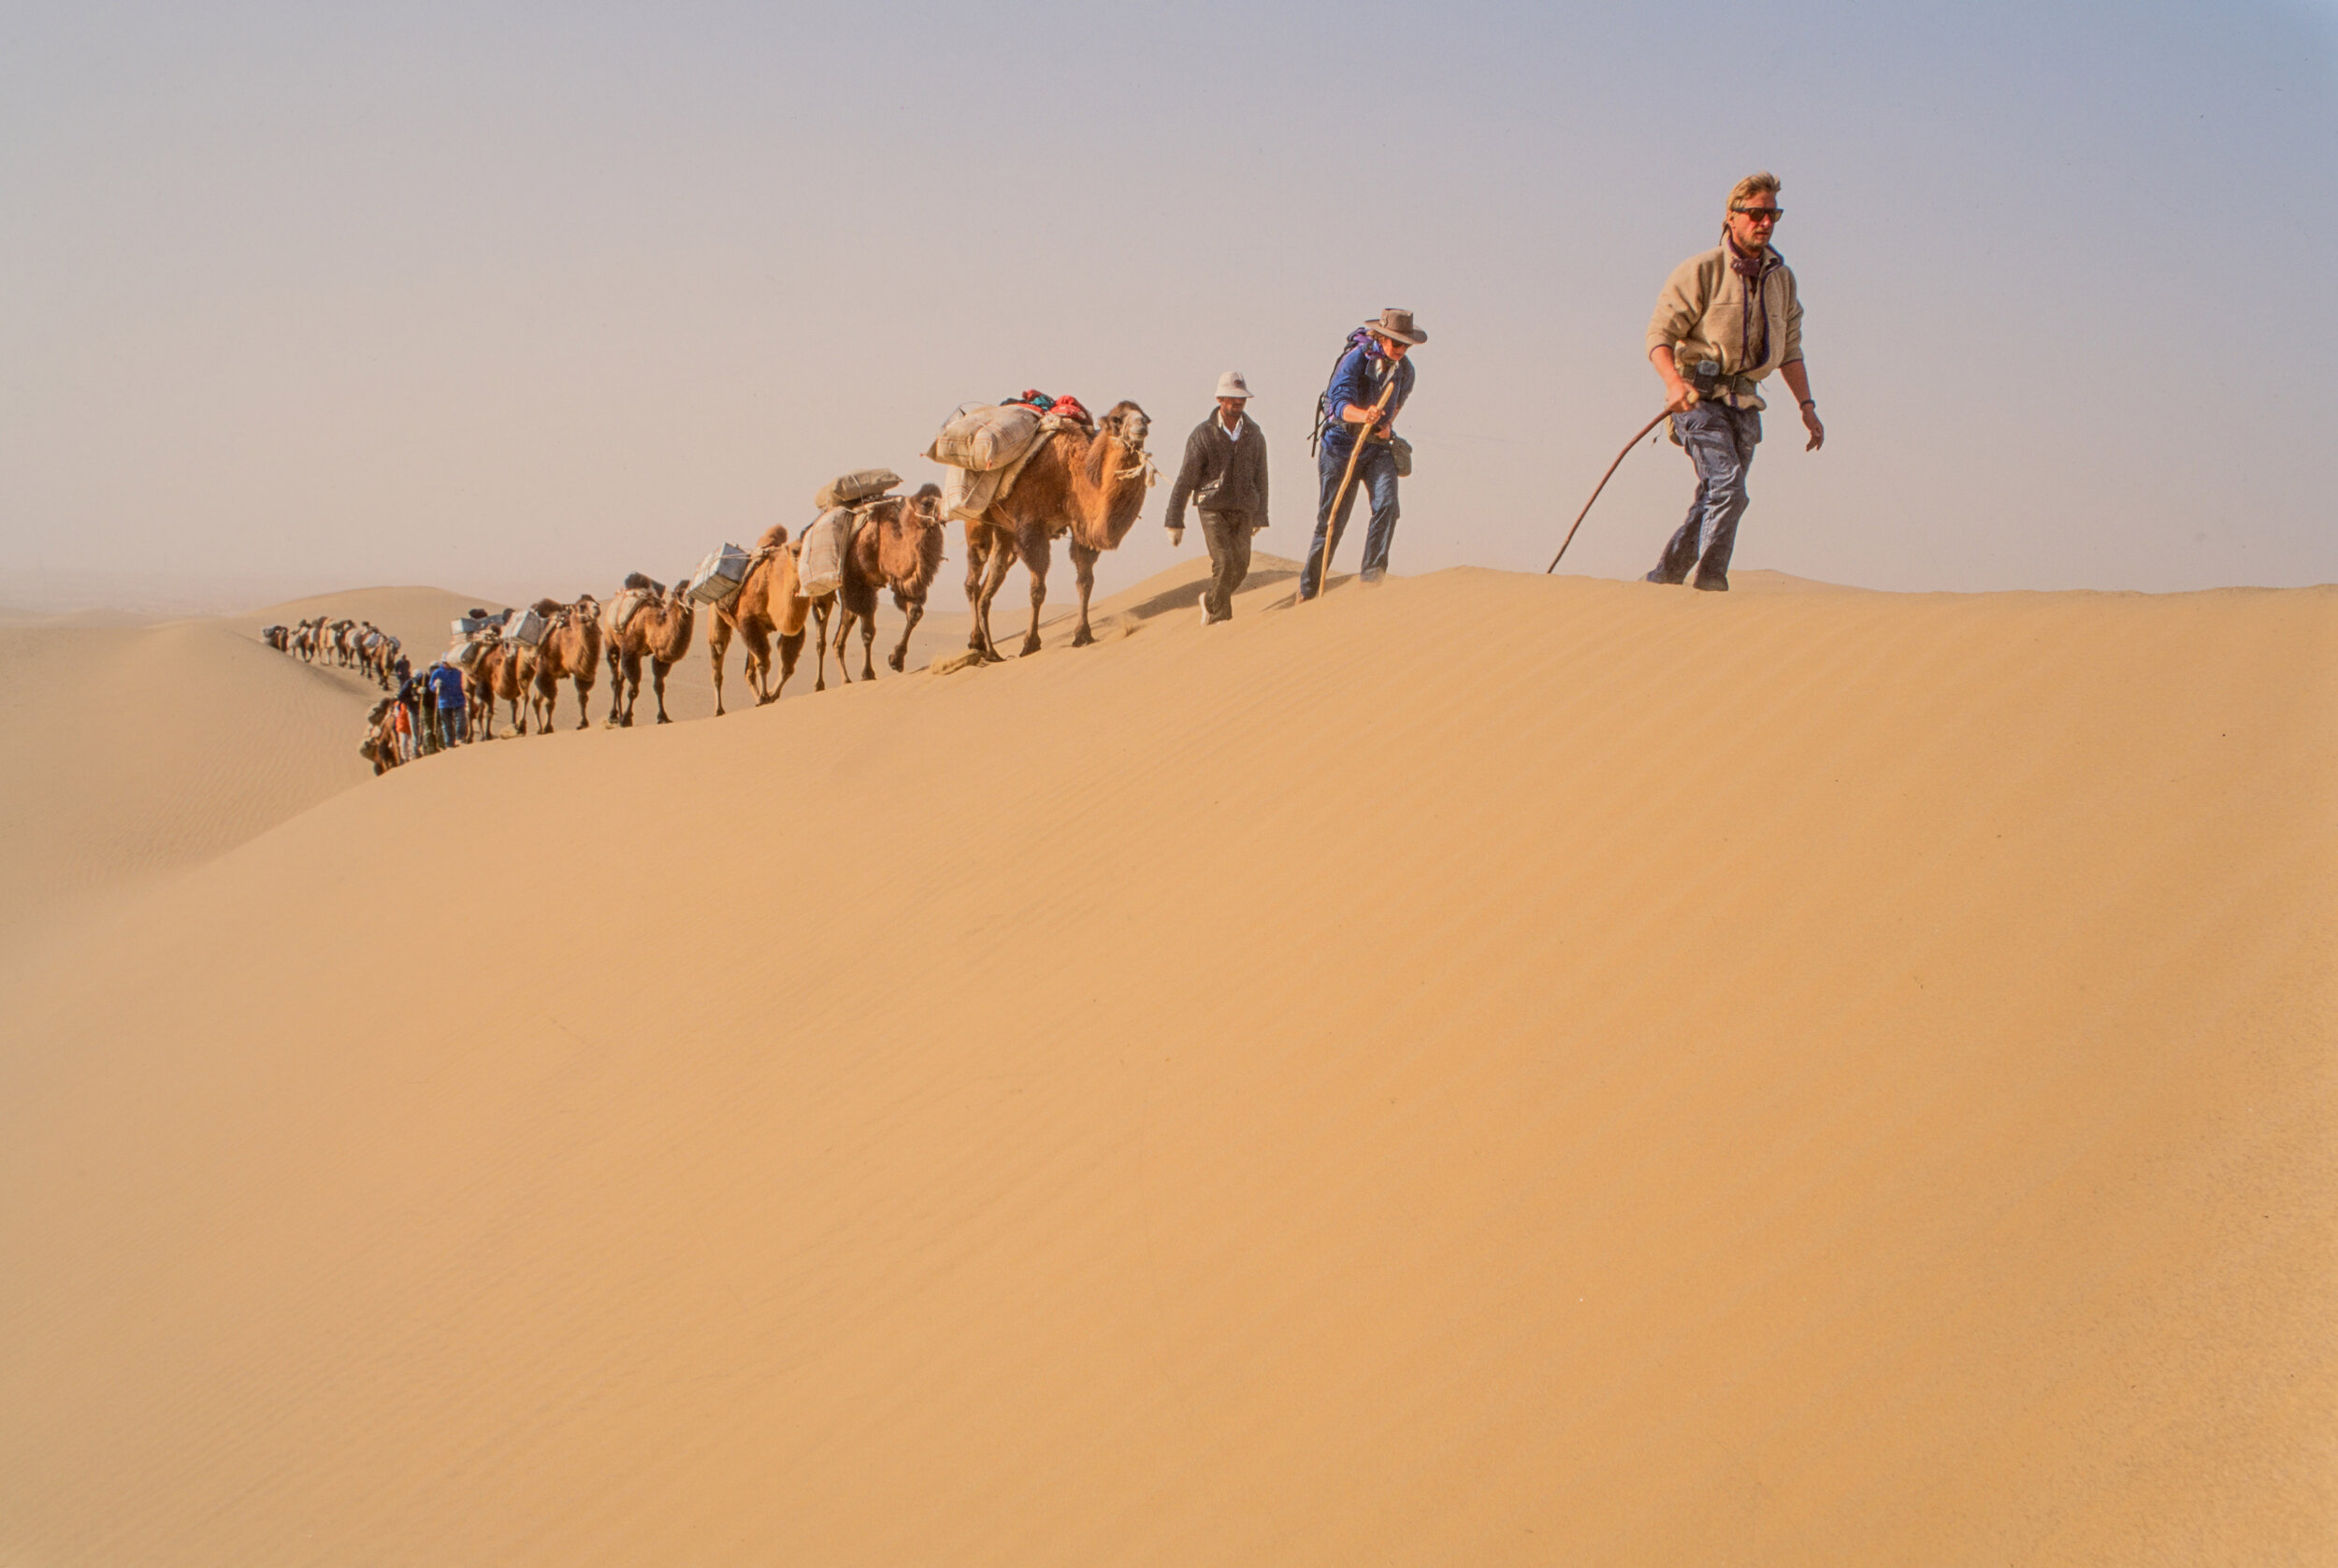  After a month in the desert the camel train was running pretty efficiently.  